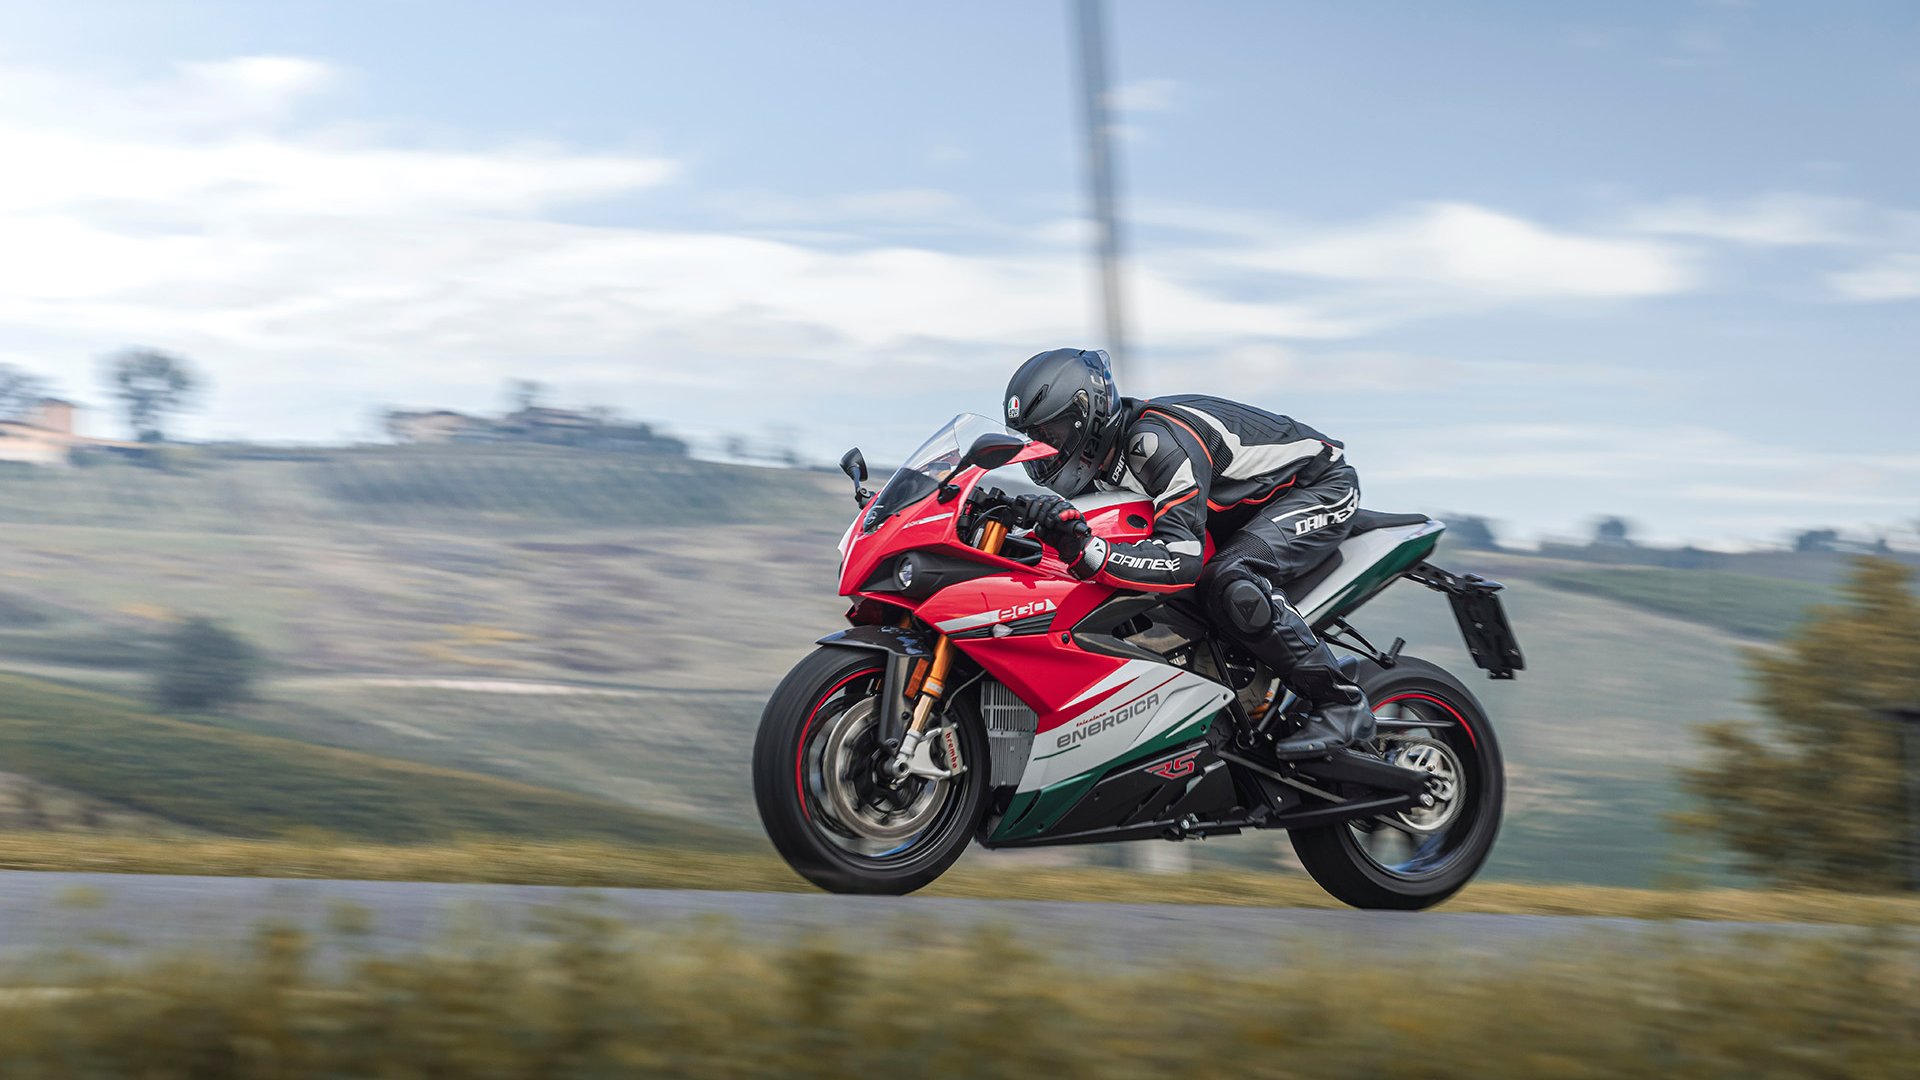 World Future Awards Recognize Energica Motor Company as Best Electric Motorcycle Manufacturer